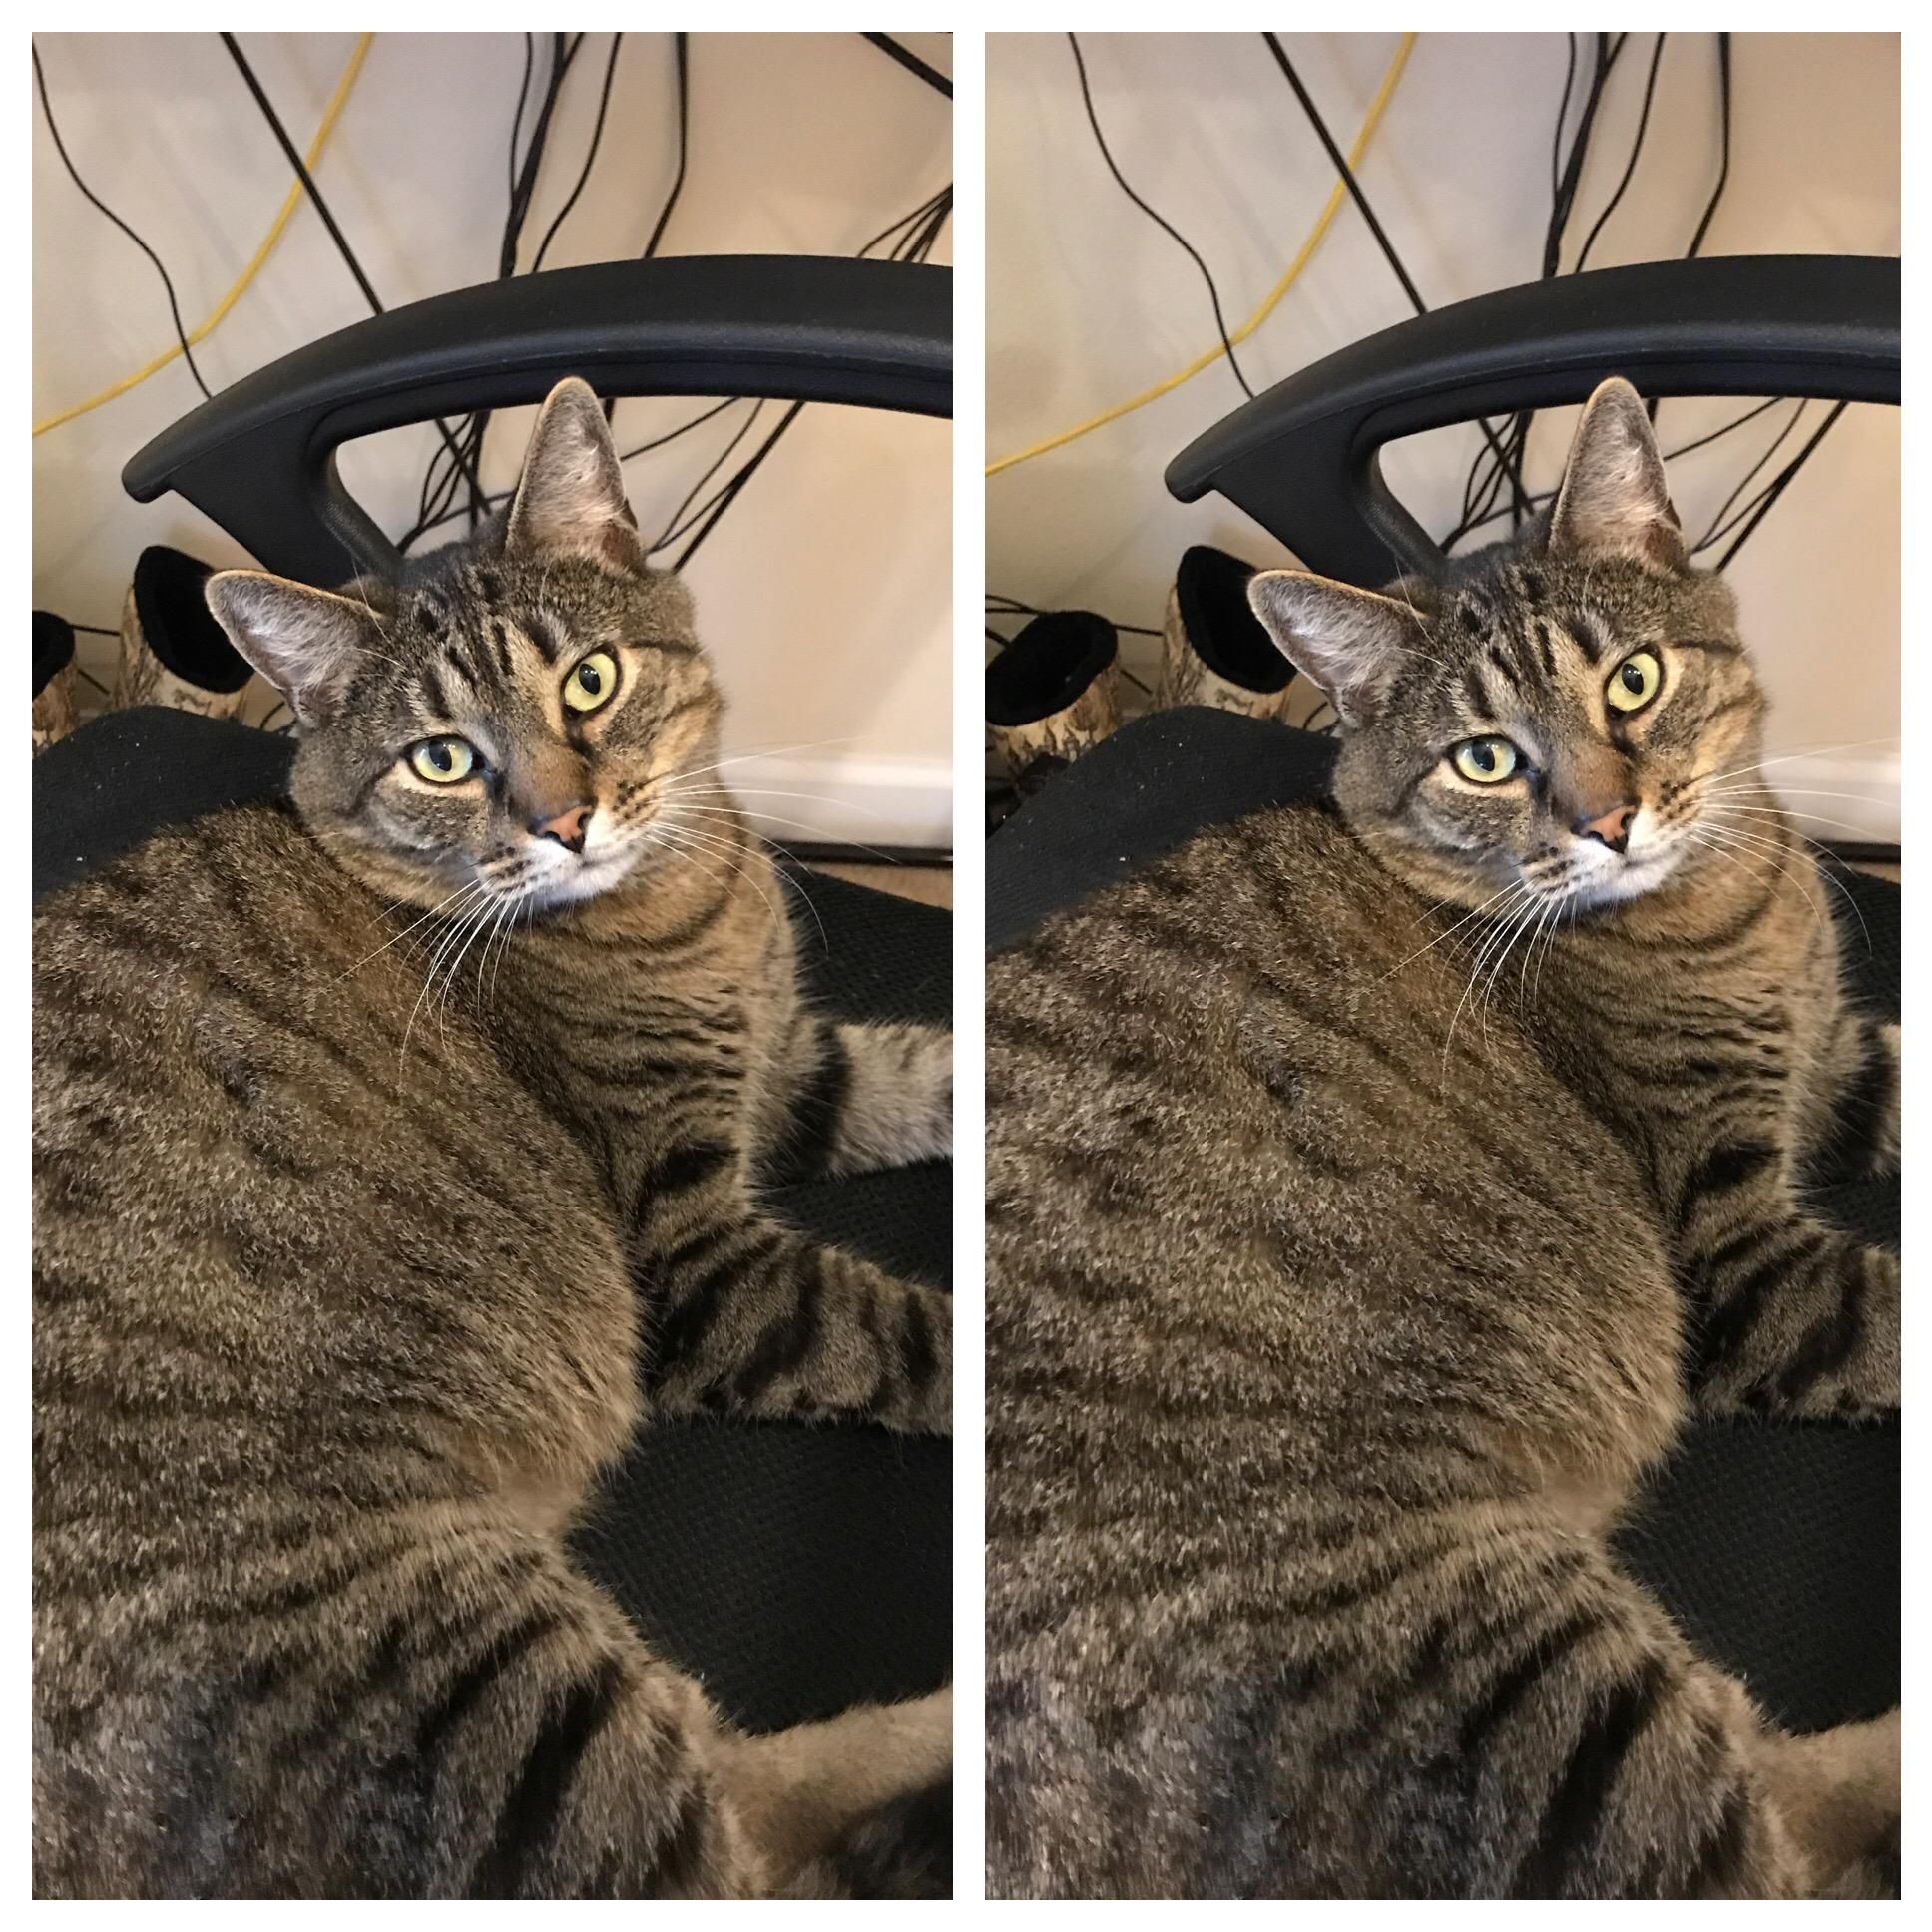 My cat before and after I tell him "he's a good boy"